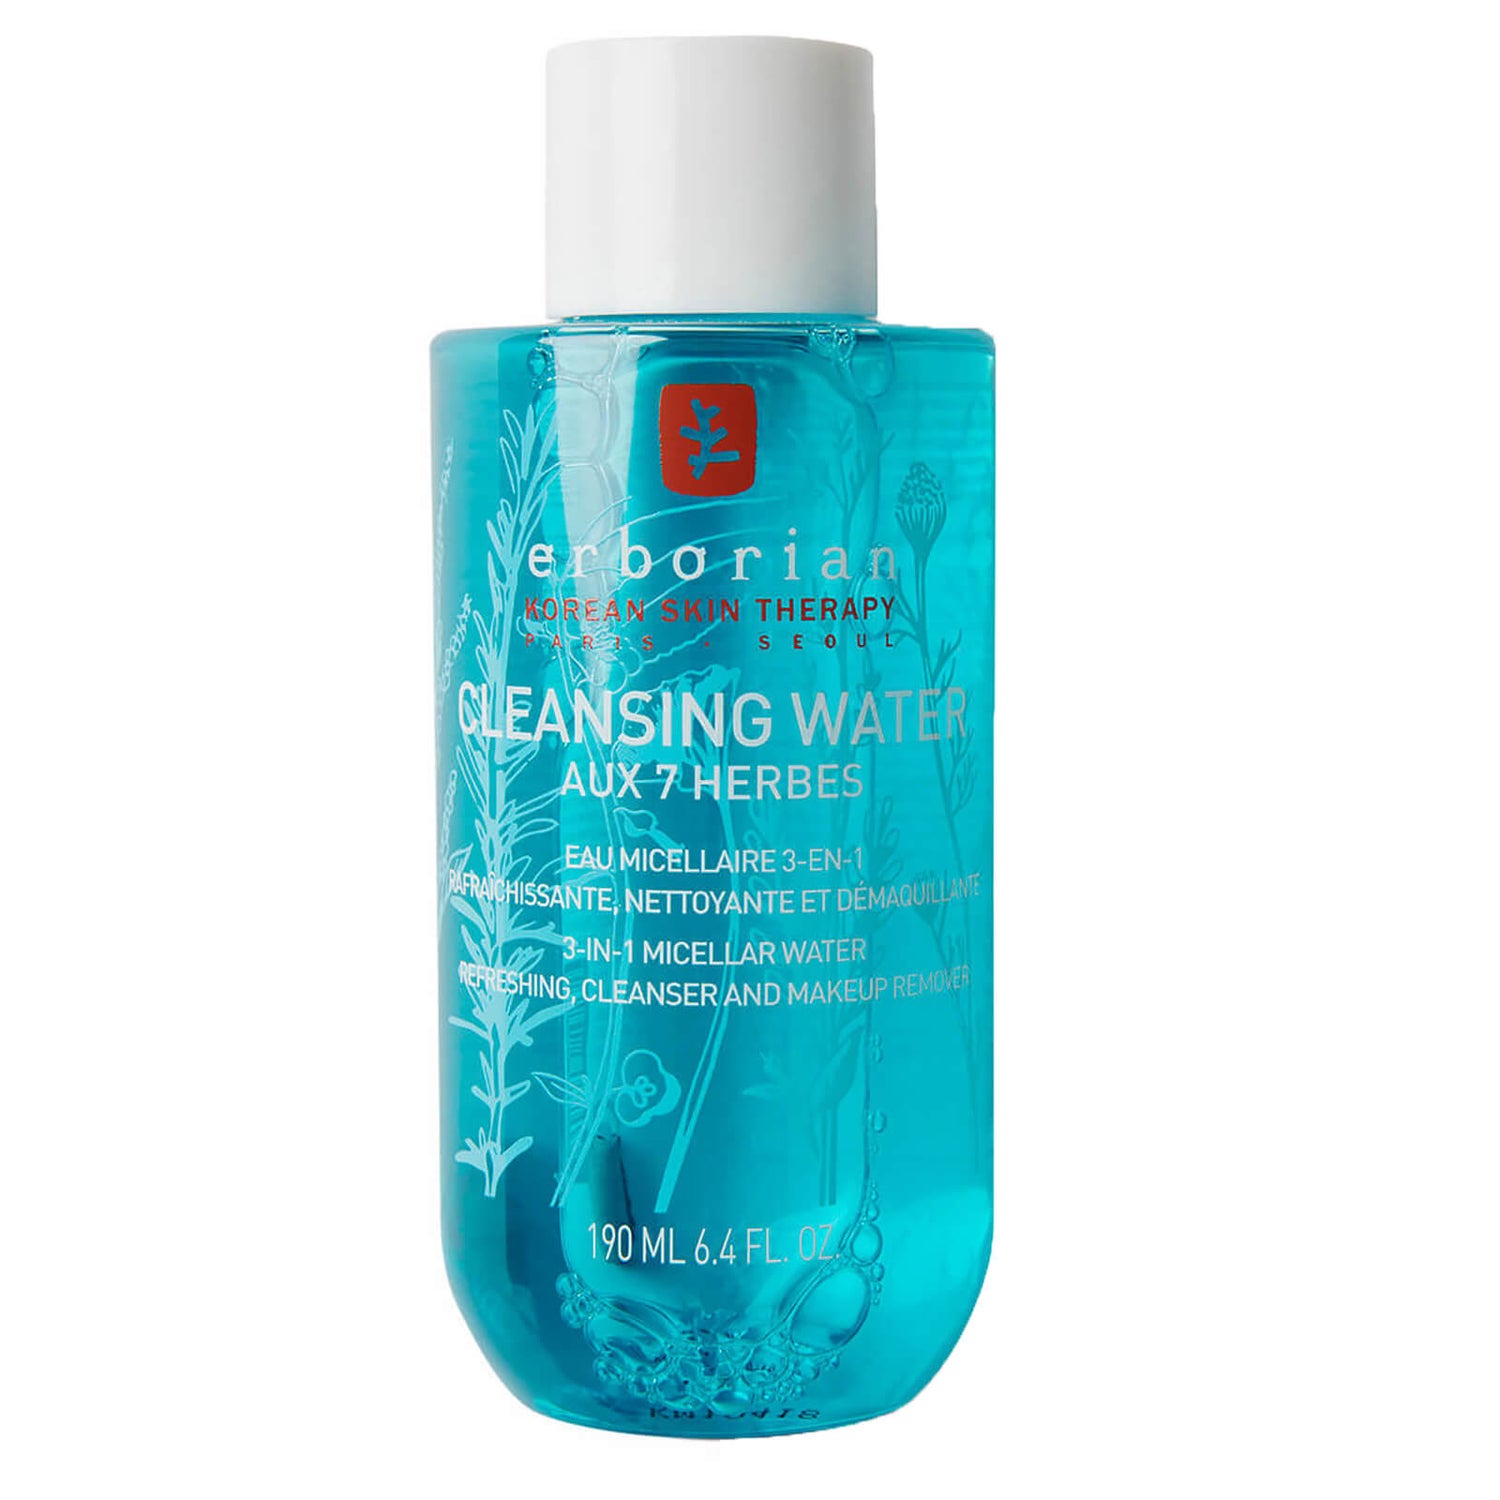 Cleansing Water with 7 Herbs - 190 ml - Acqua detergente alle 7 erbe